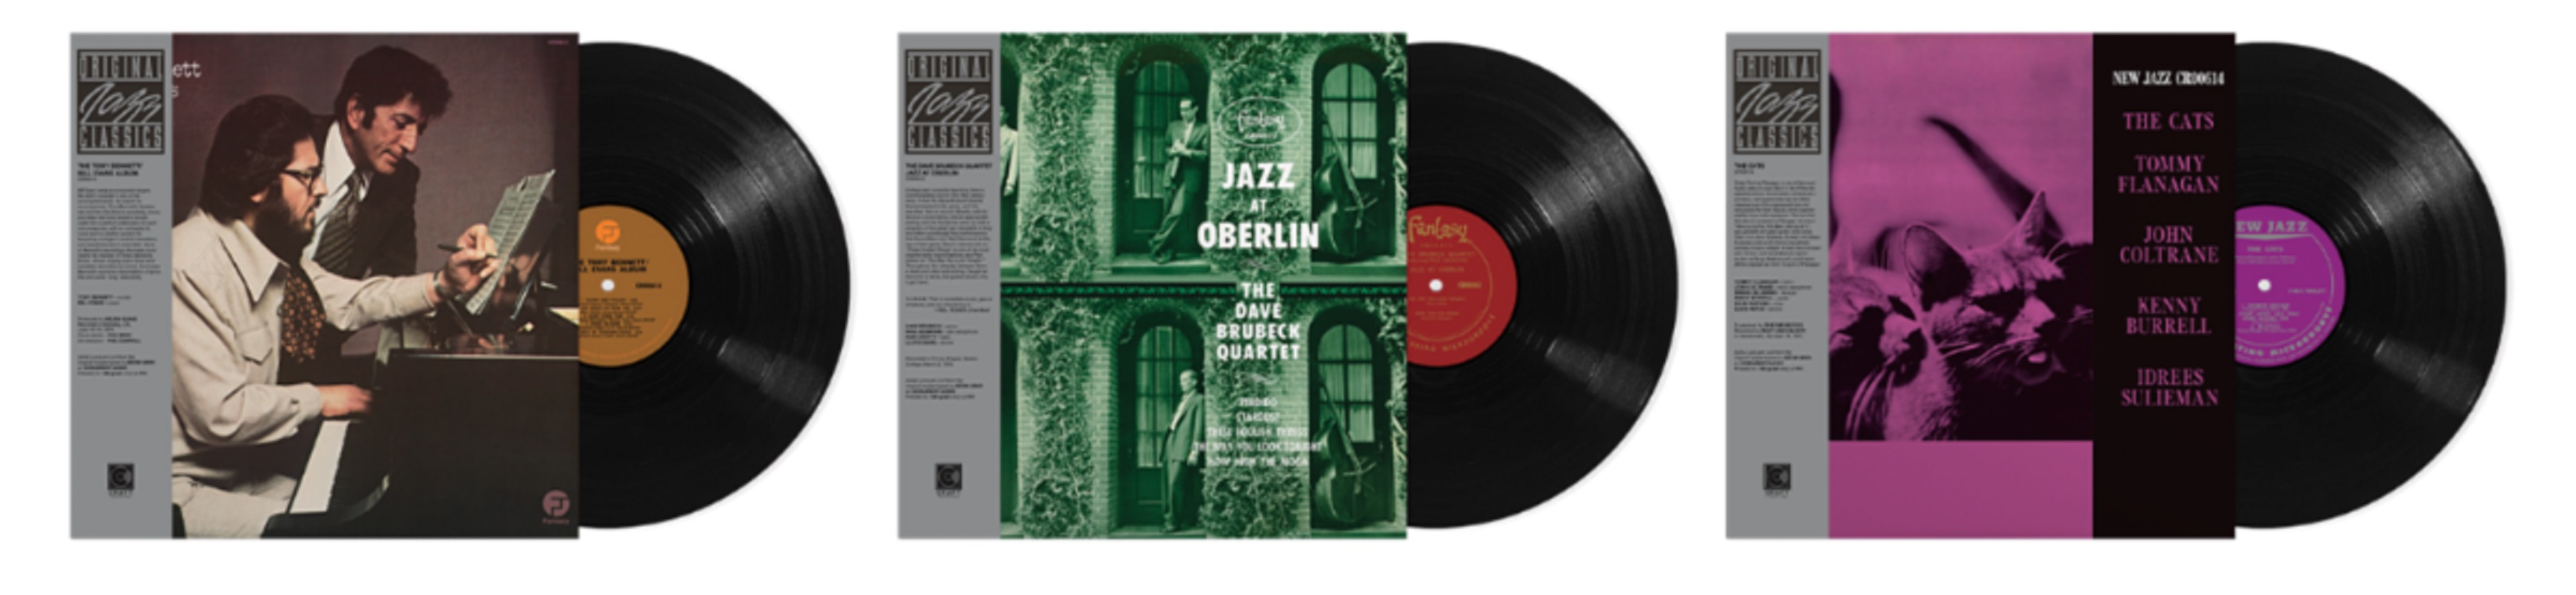 Original Jazz Classics rollout continues w/ ‘The Tony Bennett Bill Evans Album,’ The Dave Brubeck Quartet’s ‘Jazz at Oberlin’ and ‘The Cats’